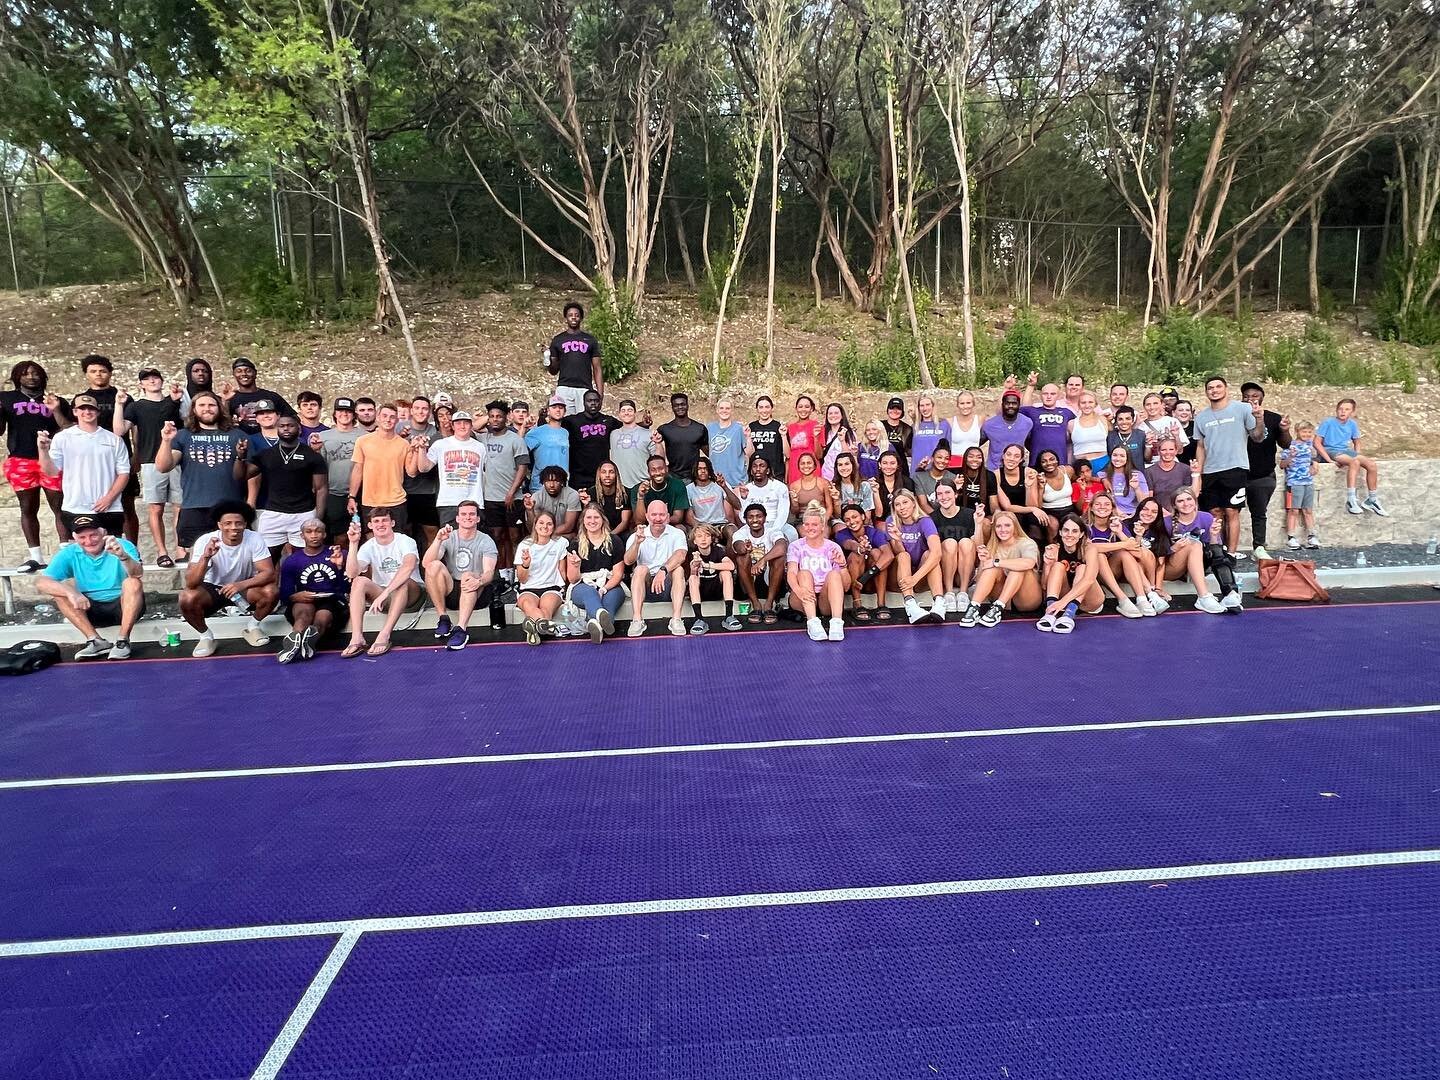 The FCA huddle at @chaunceyfranks&rsquo;s house last night was awesome! We love our TCU students and TCU student-athletes. God is good, all the time. #GoFrogs #AudienceOfOne #NoPerfectPeopleAllowed